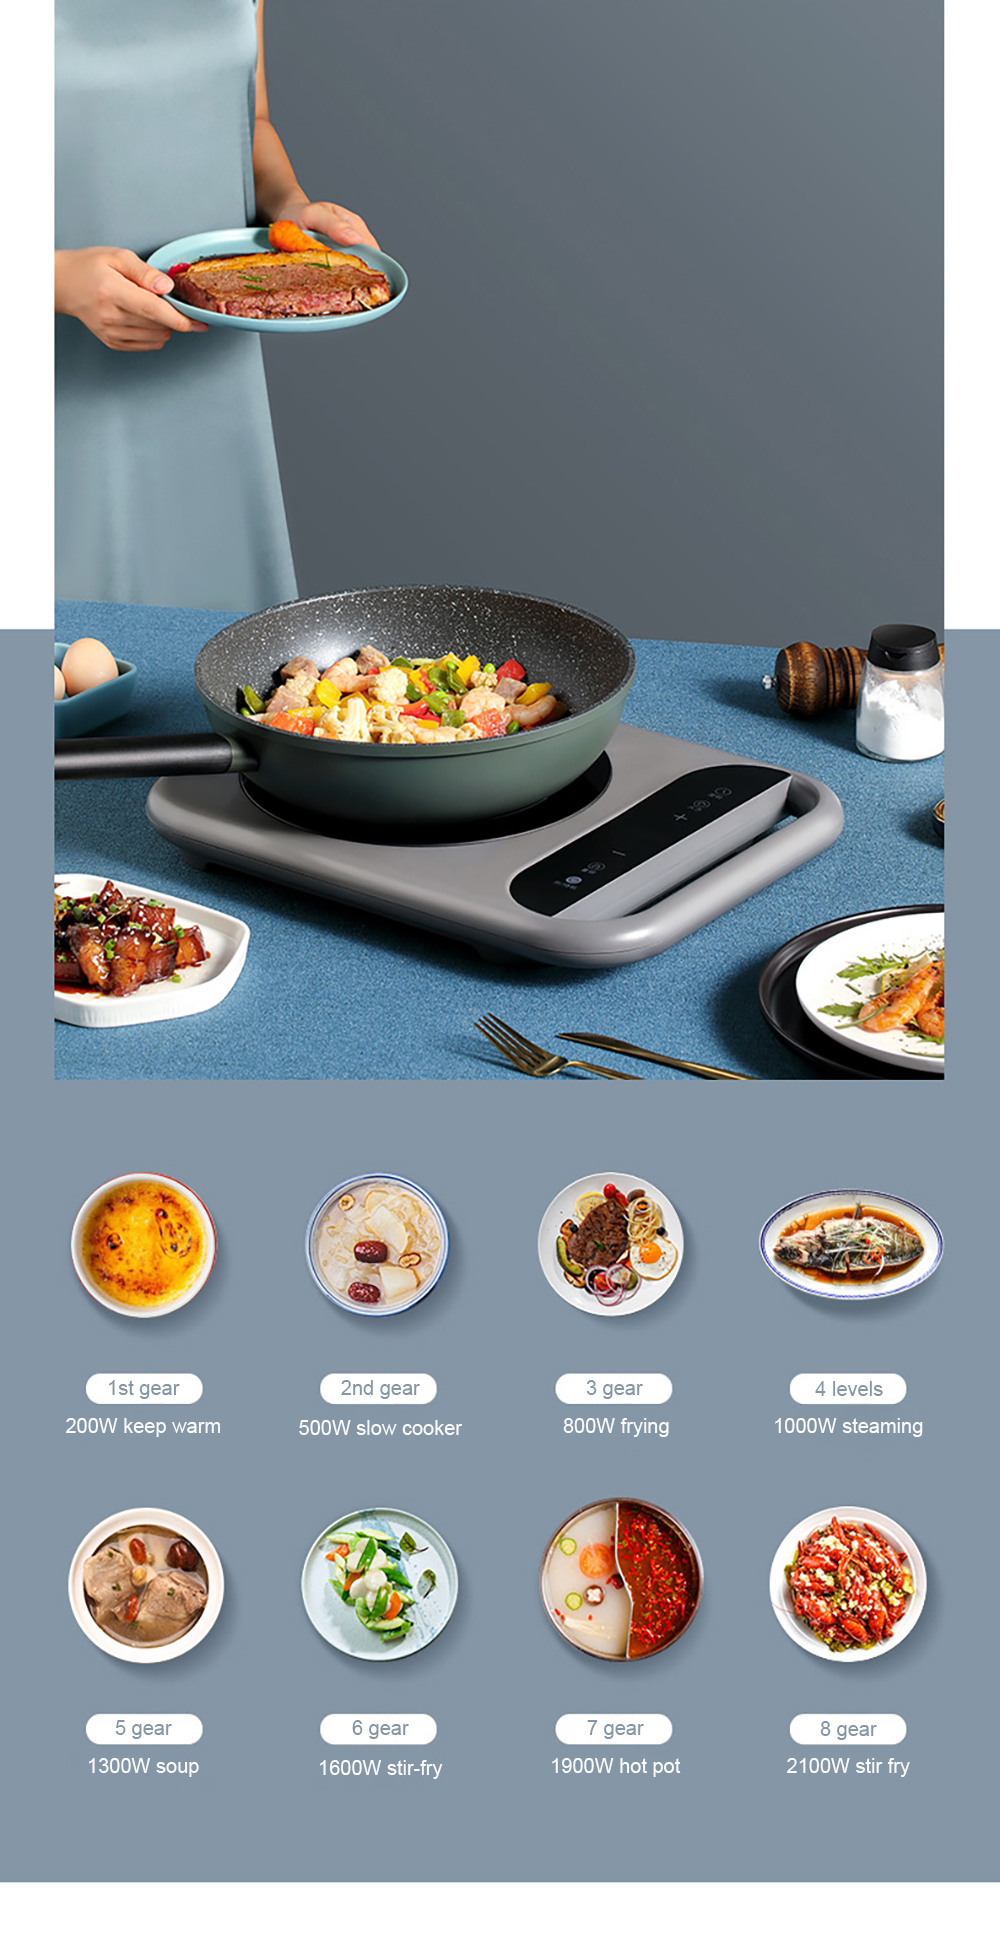 KONKA-KEO-IS3-2100W-Sensor-Touch-Electric-Induction-Cooker-Portable-Induction-CooktopCooktop-with-Ki-1926484-9